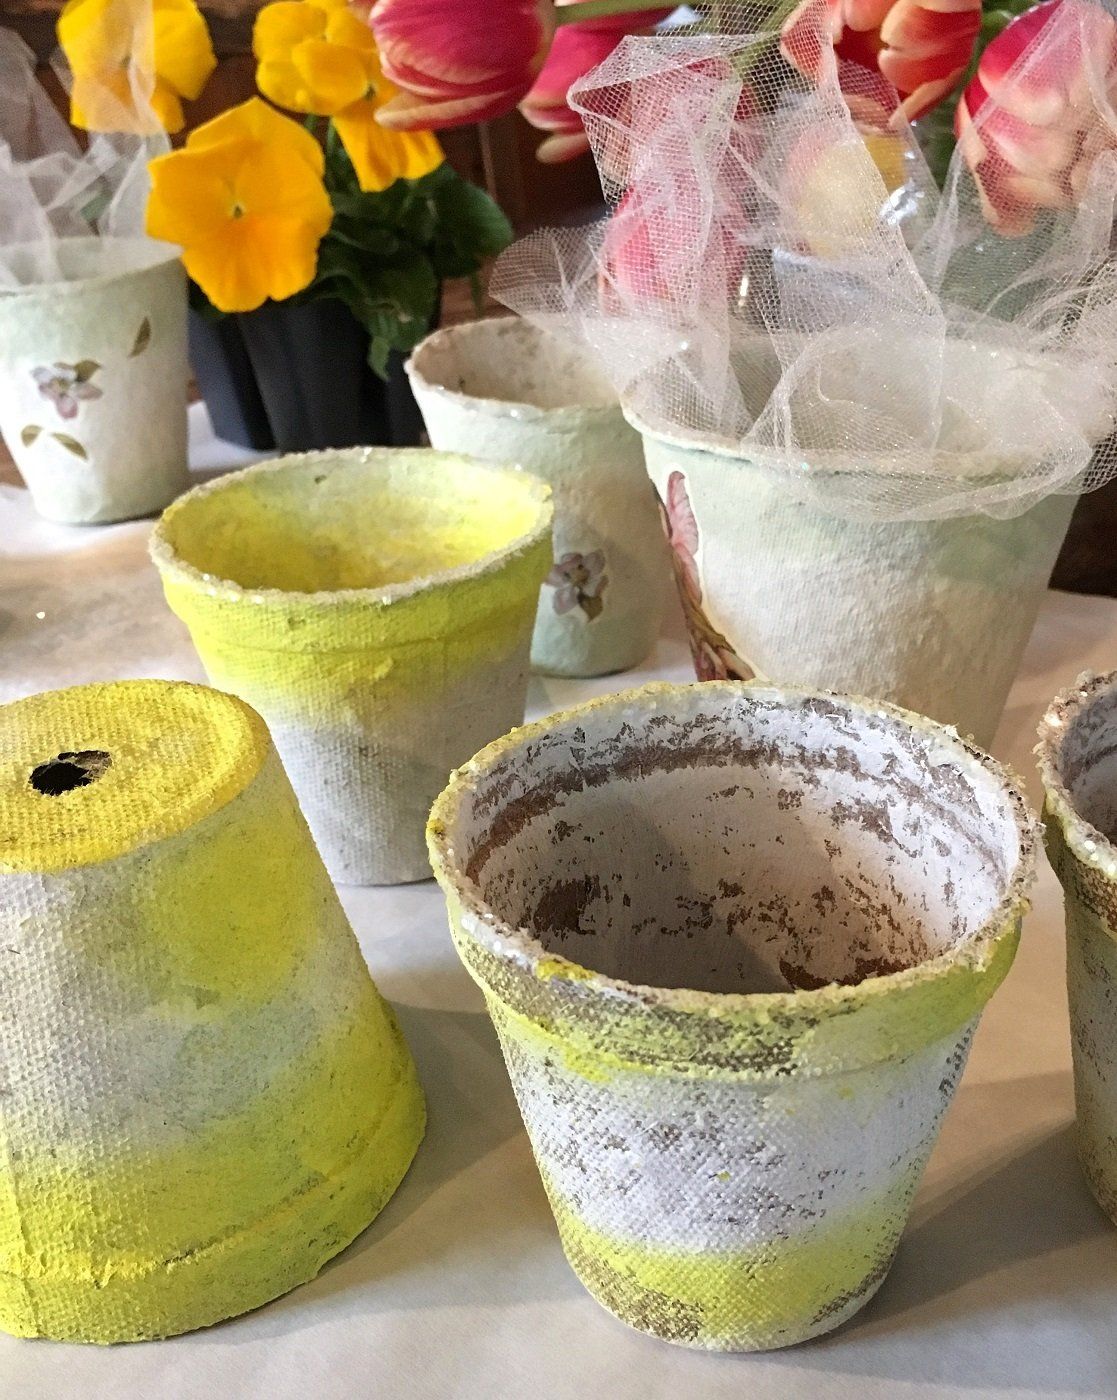 Join us on March 20 and learn to make Peat Pot Gift Cups, perfect for your table or to give!